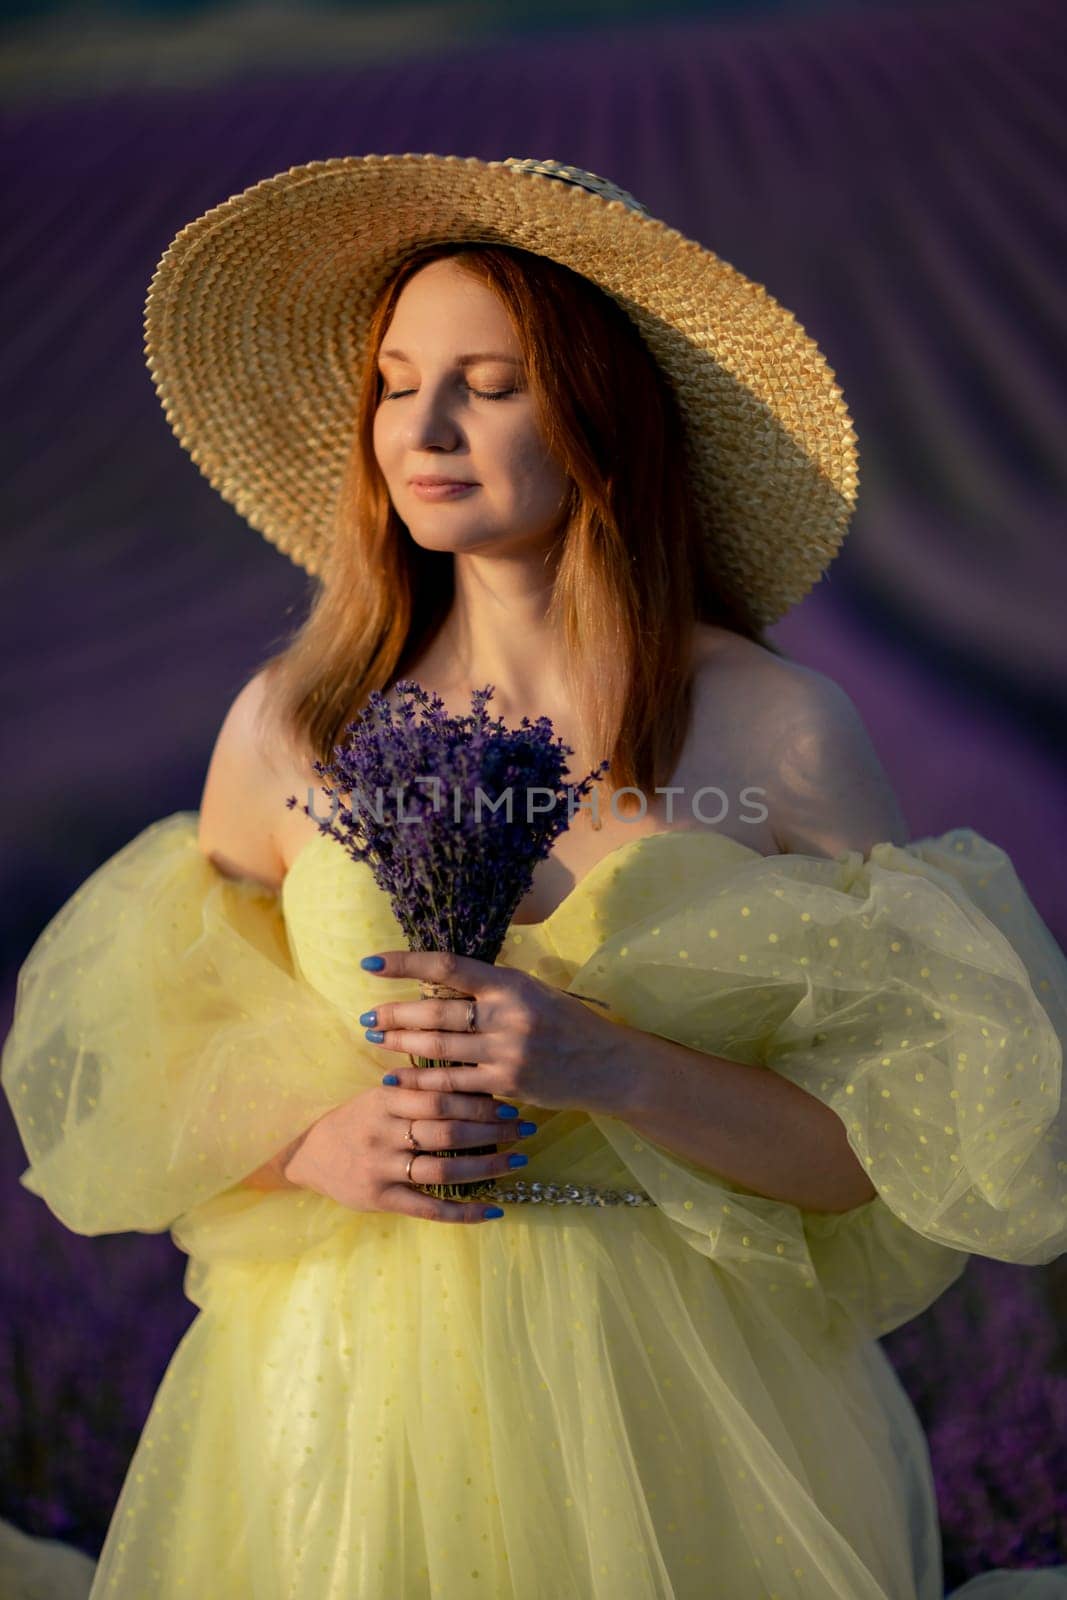 Lavender sunset girl. A laughing girl in a blue dress with flowing hair in a hat walks through a lilac field, holds a bouquet of lavender in her hands